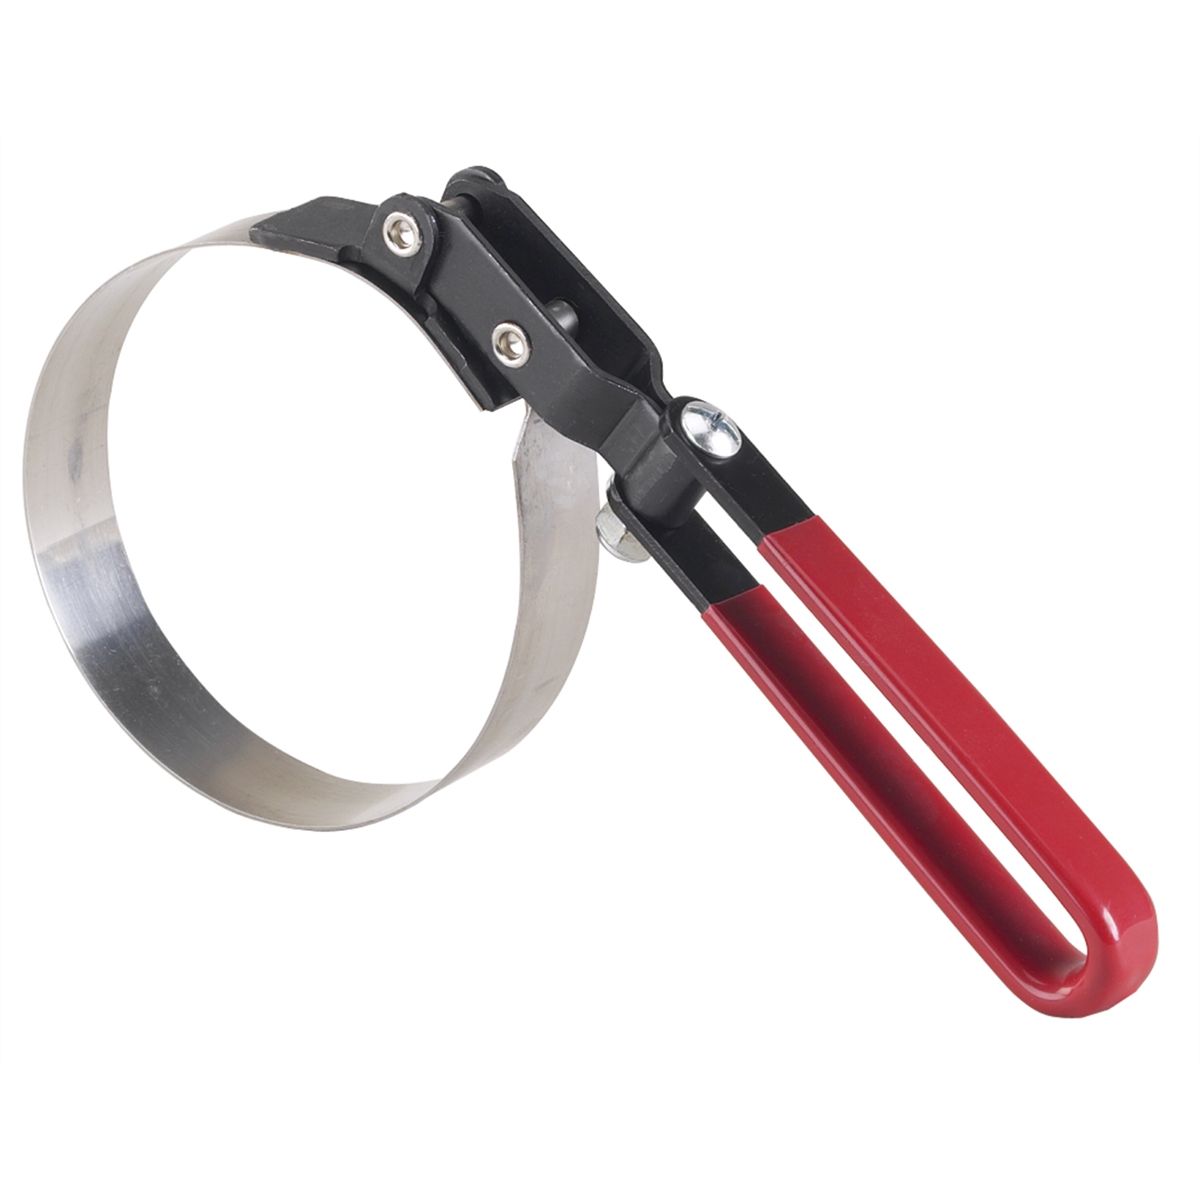 OIL FILTER WRENCH